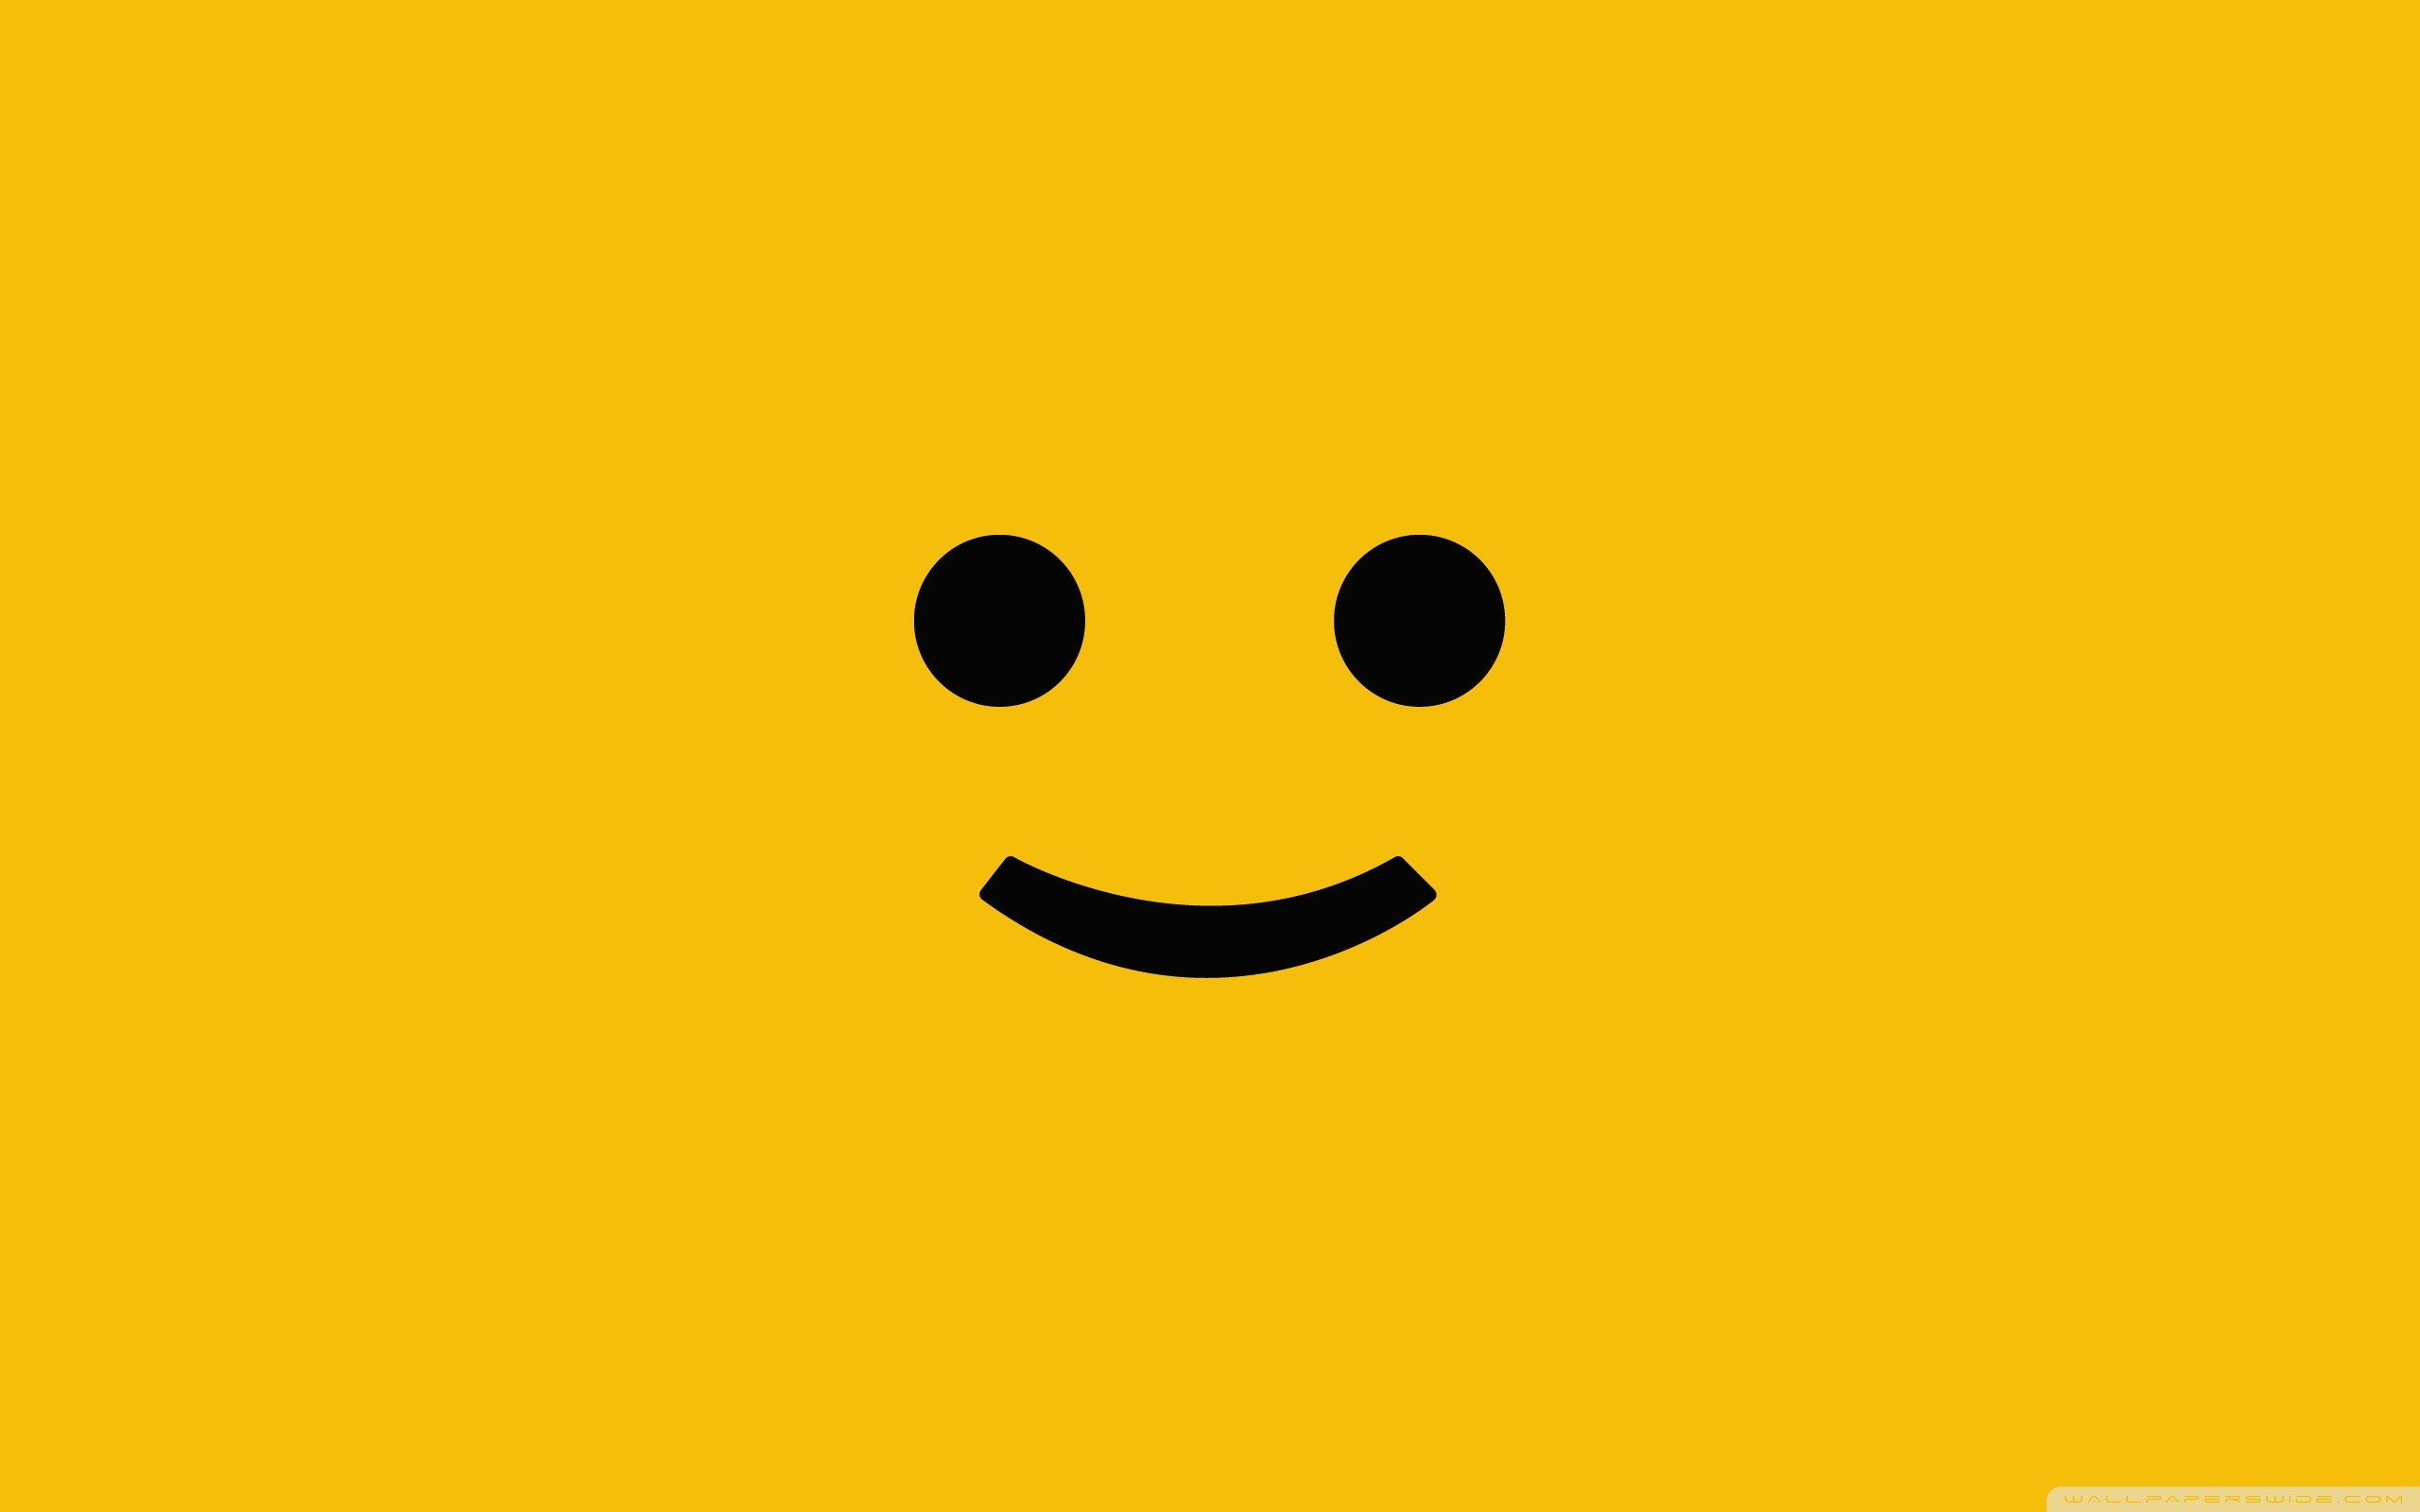 Free Download Free Download 56 Happy Face Wallpapers On Wallpaperplay 2560x1600 2560x1600 For Your Desktop Mobile Tablet Explore 18 Yellow Smiley Face Wallpapers Smiley Face Backgrounds Smiley Face Wallpapers Smiley Face Wallpaper